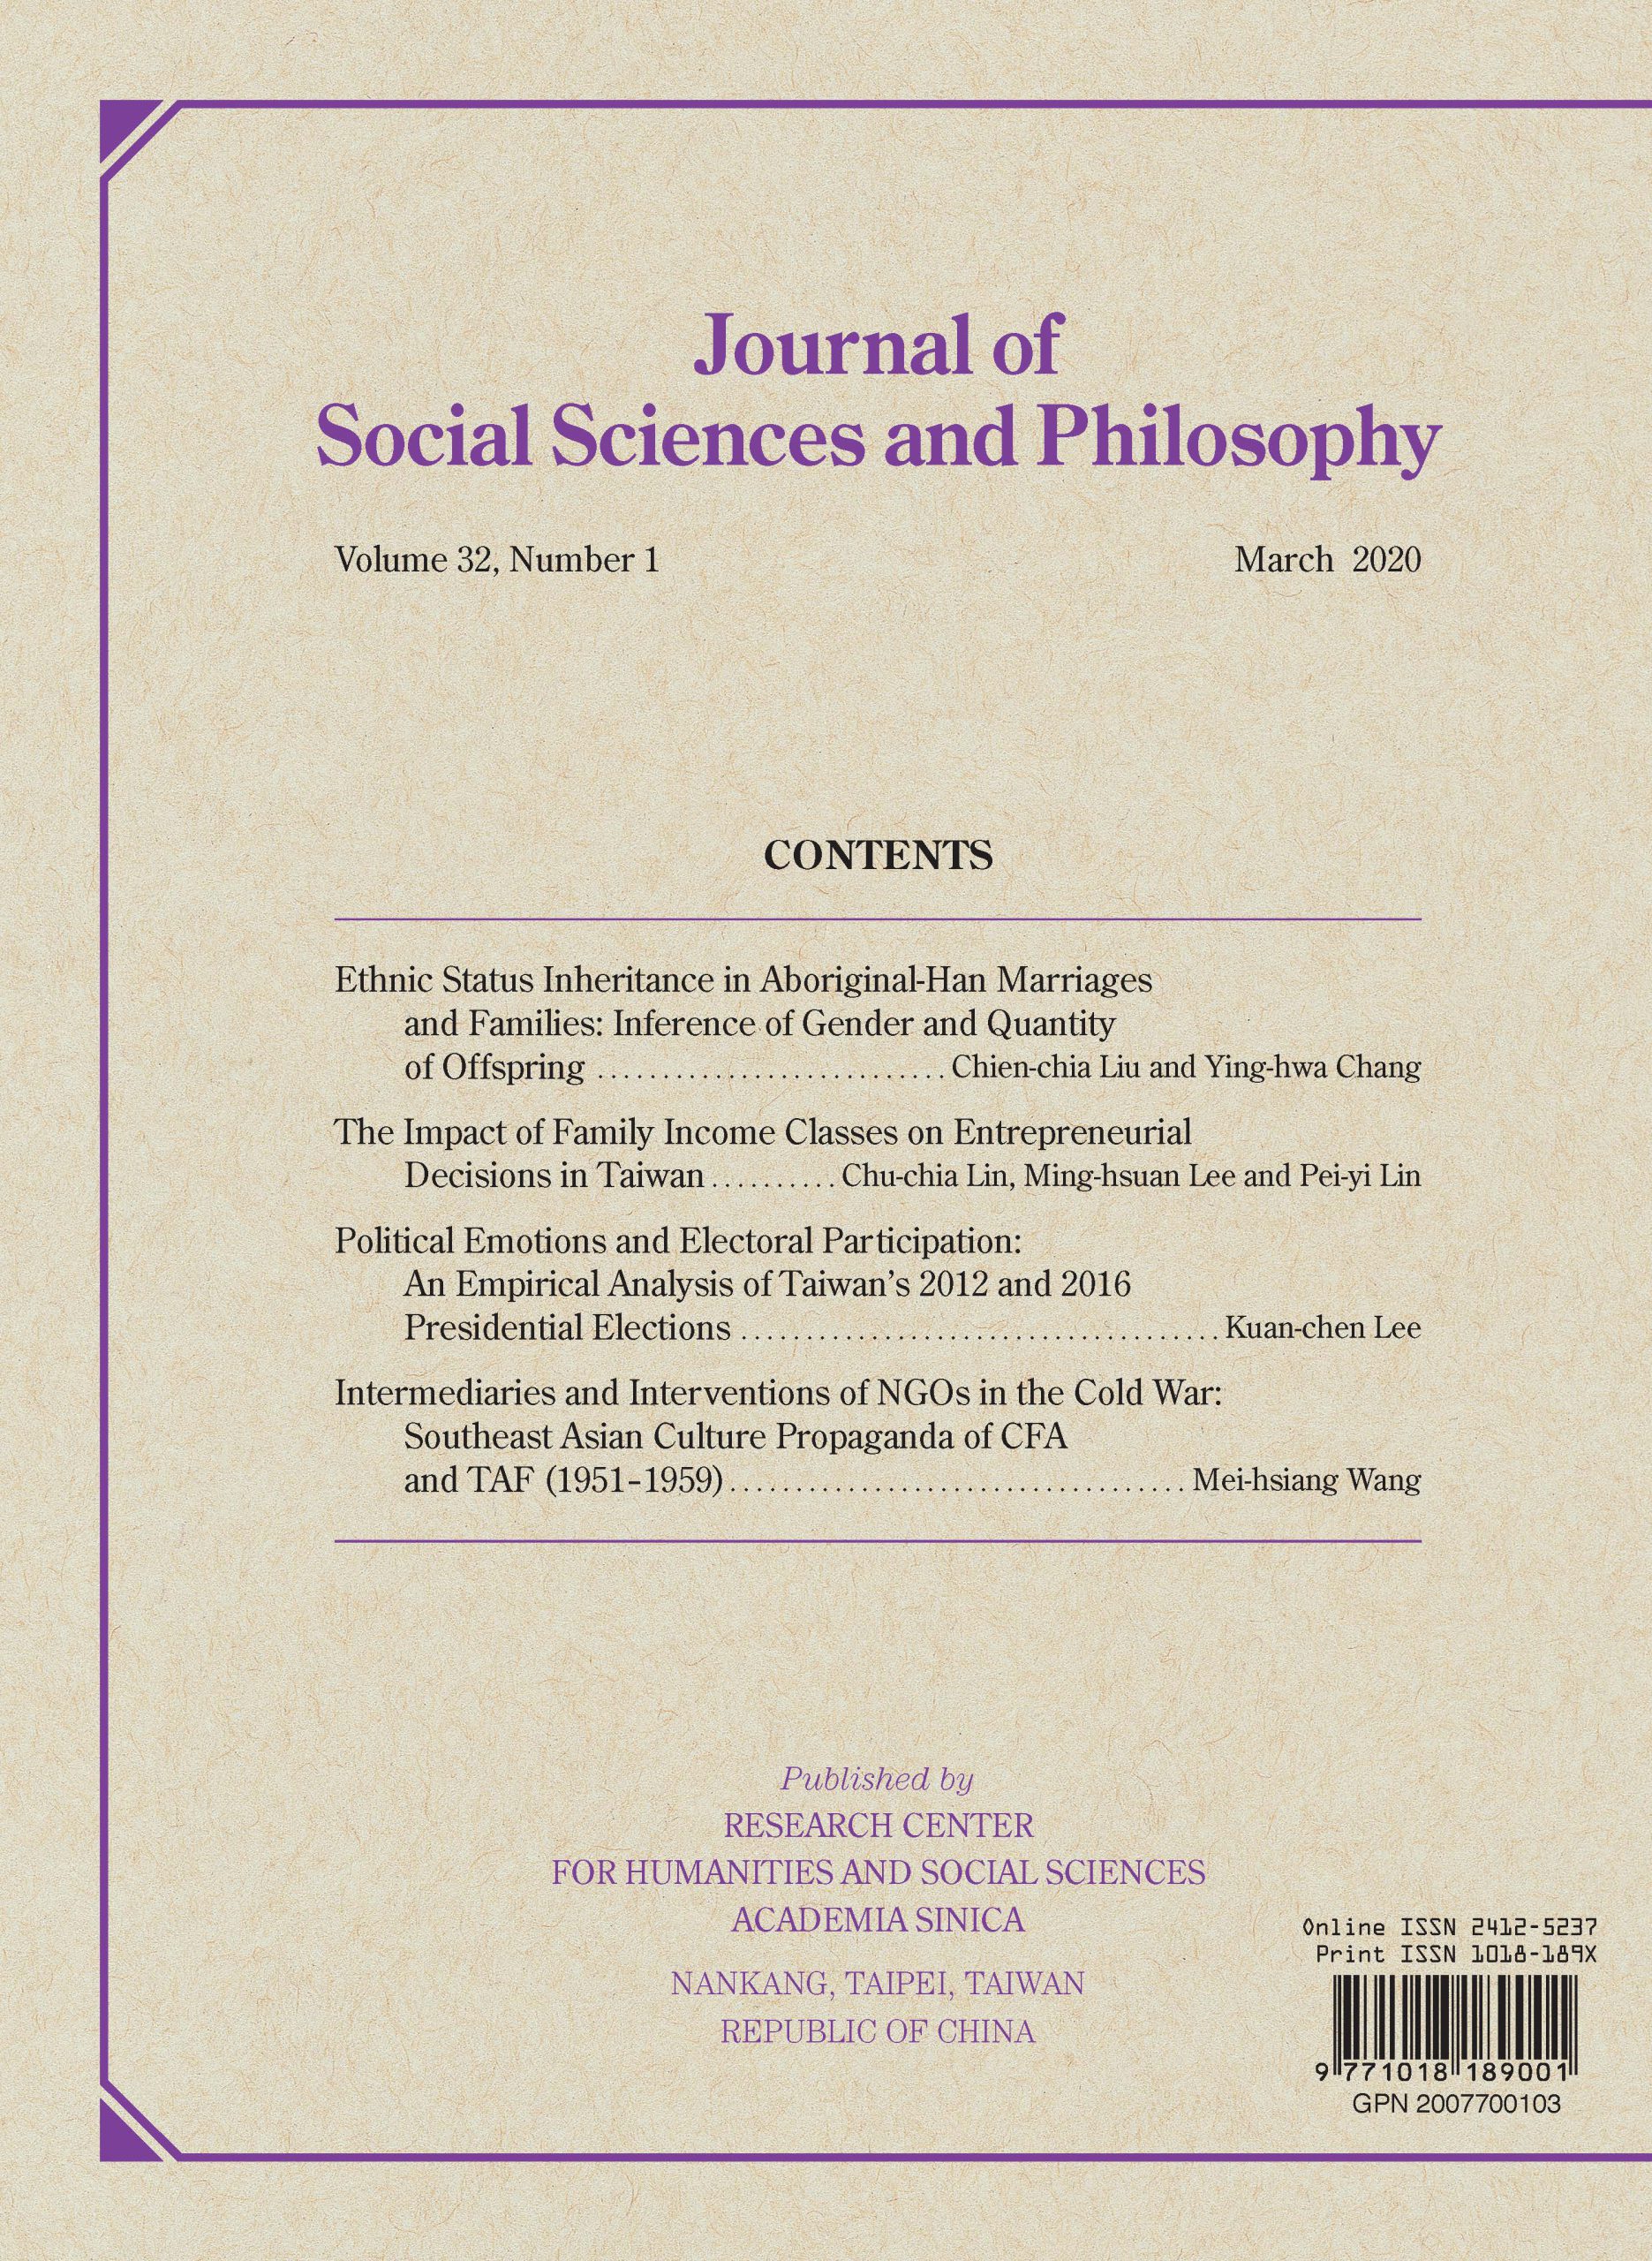 Journal of Social Sciences and Philosophy (Vol.32, No.1) has been published